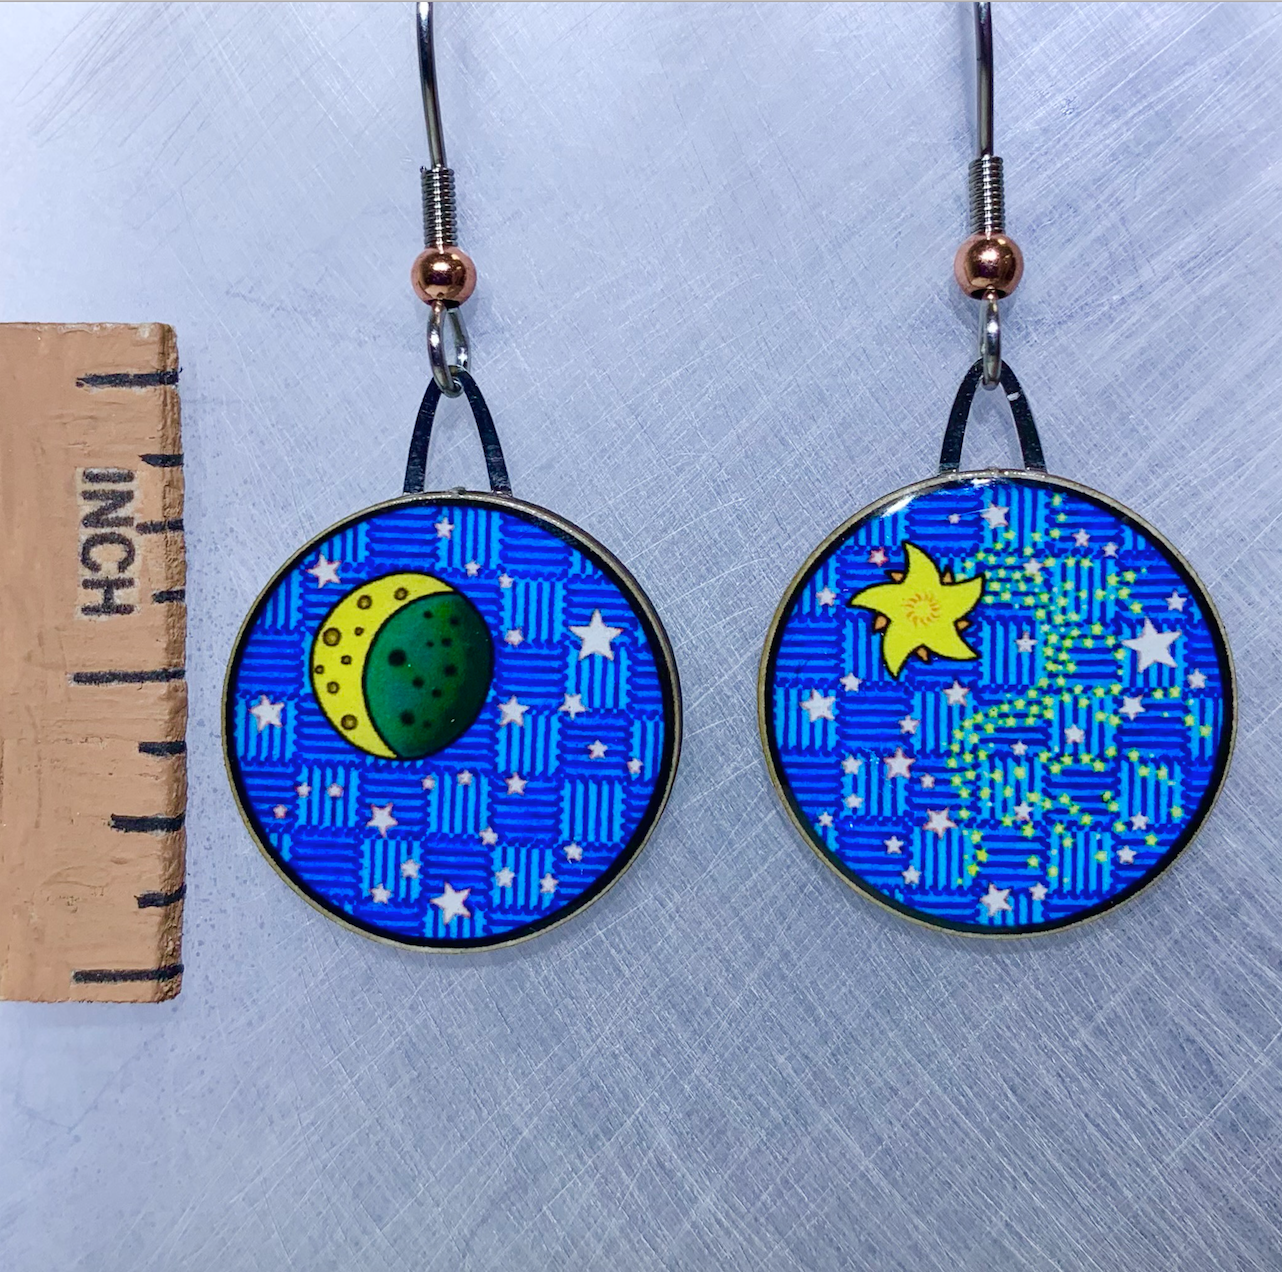 Picture shown is of 1 inch tall pair of earrings of Night Sky.